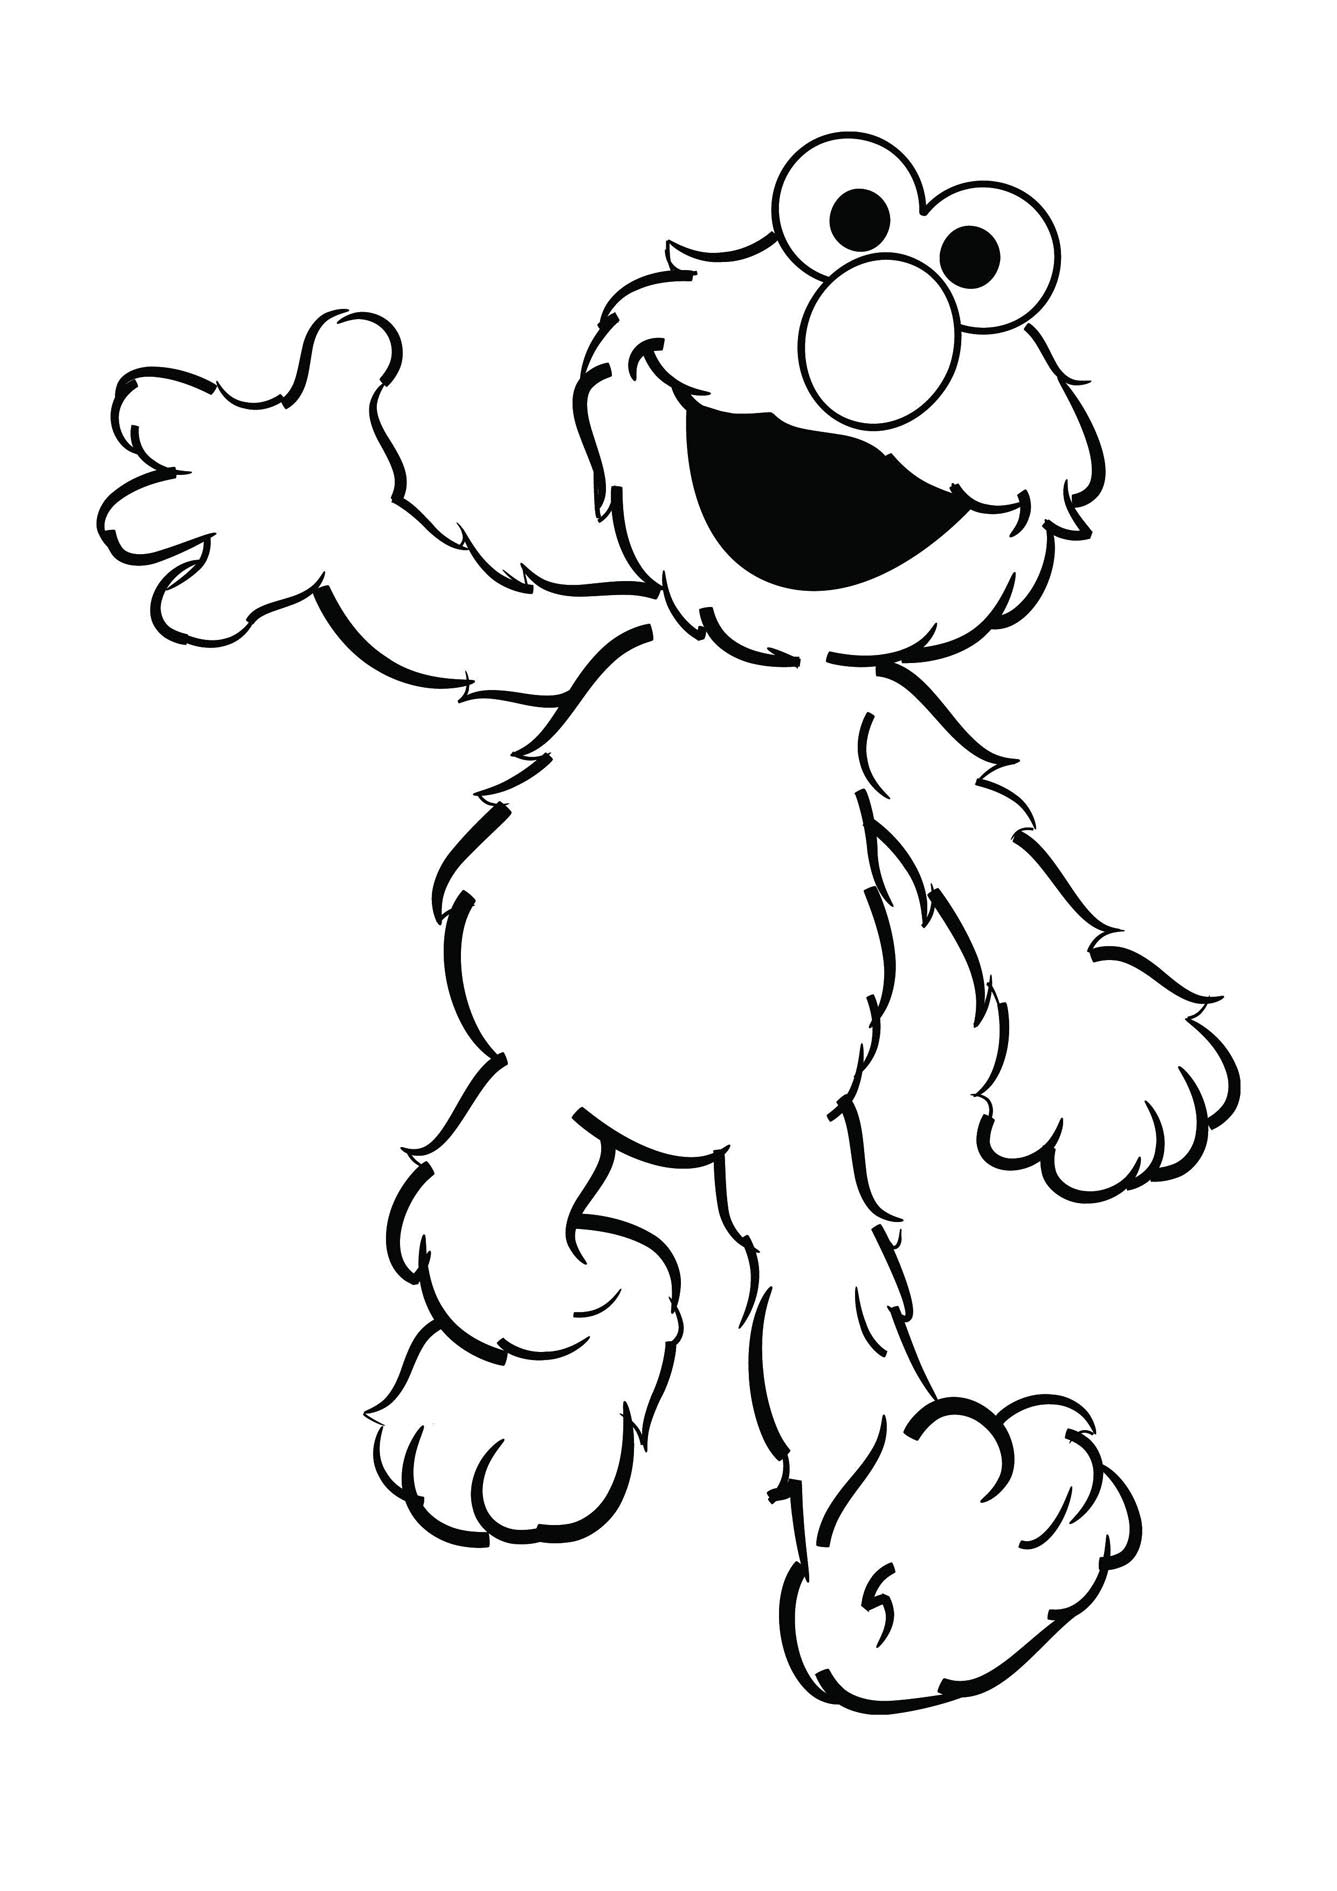 Sesame Street Sign Coloring Page Sesame Street To Print For Free Sesame Street Kids Coloring Pages